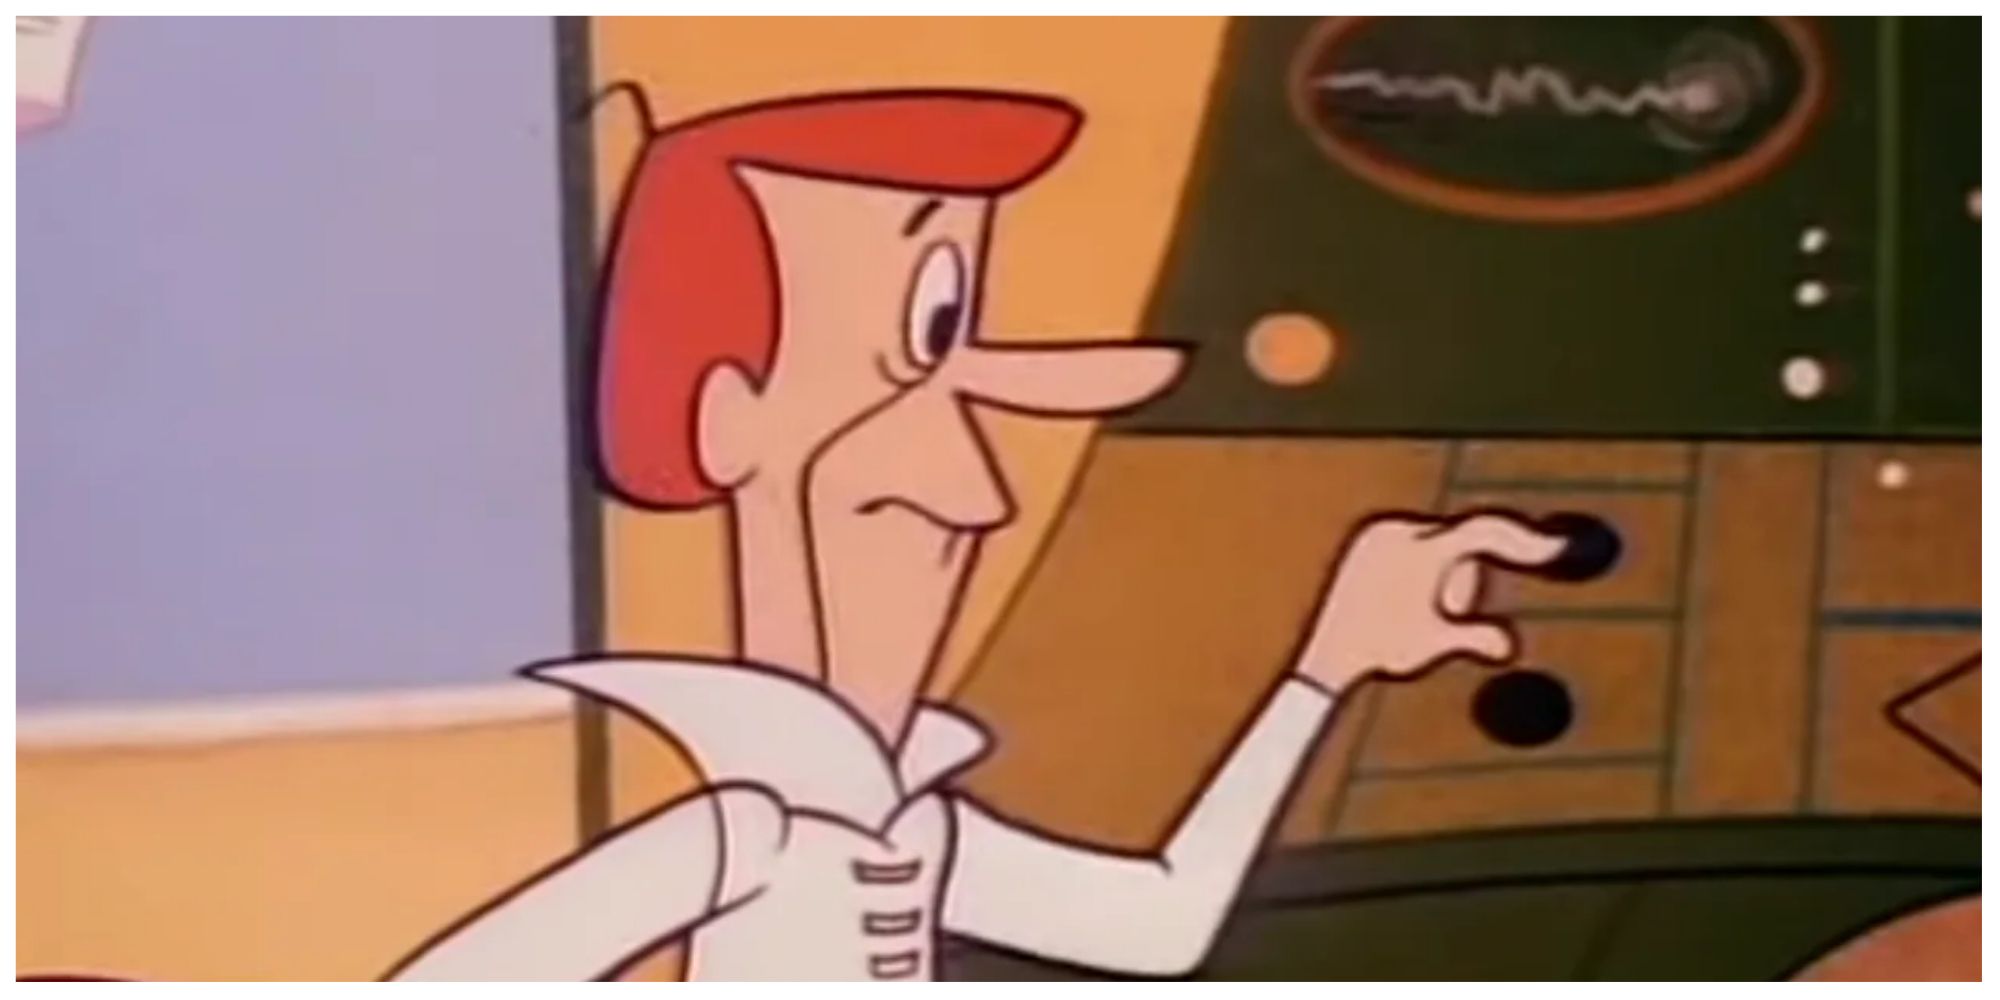 George Jetson in the Jetsons